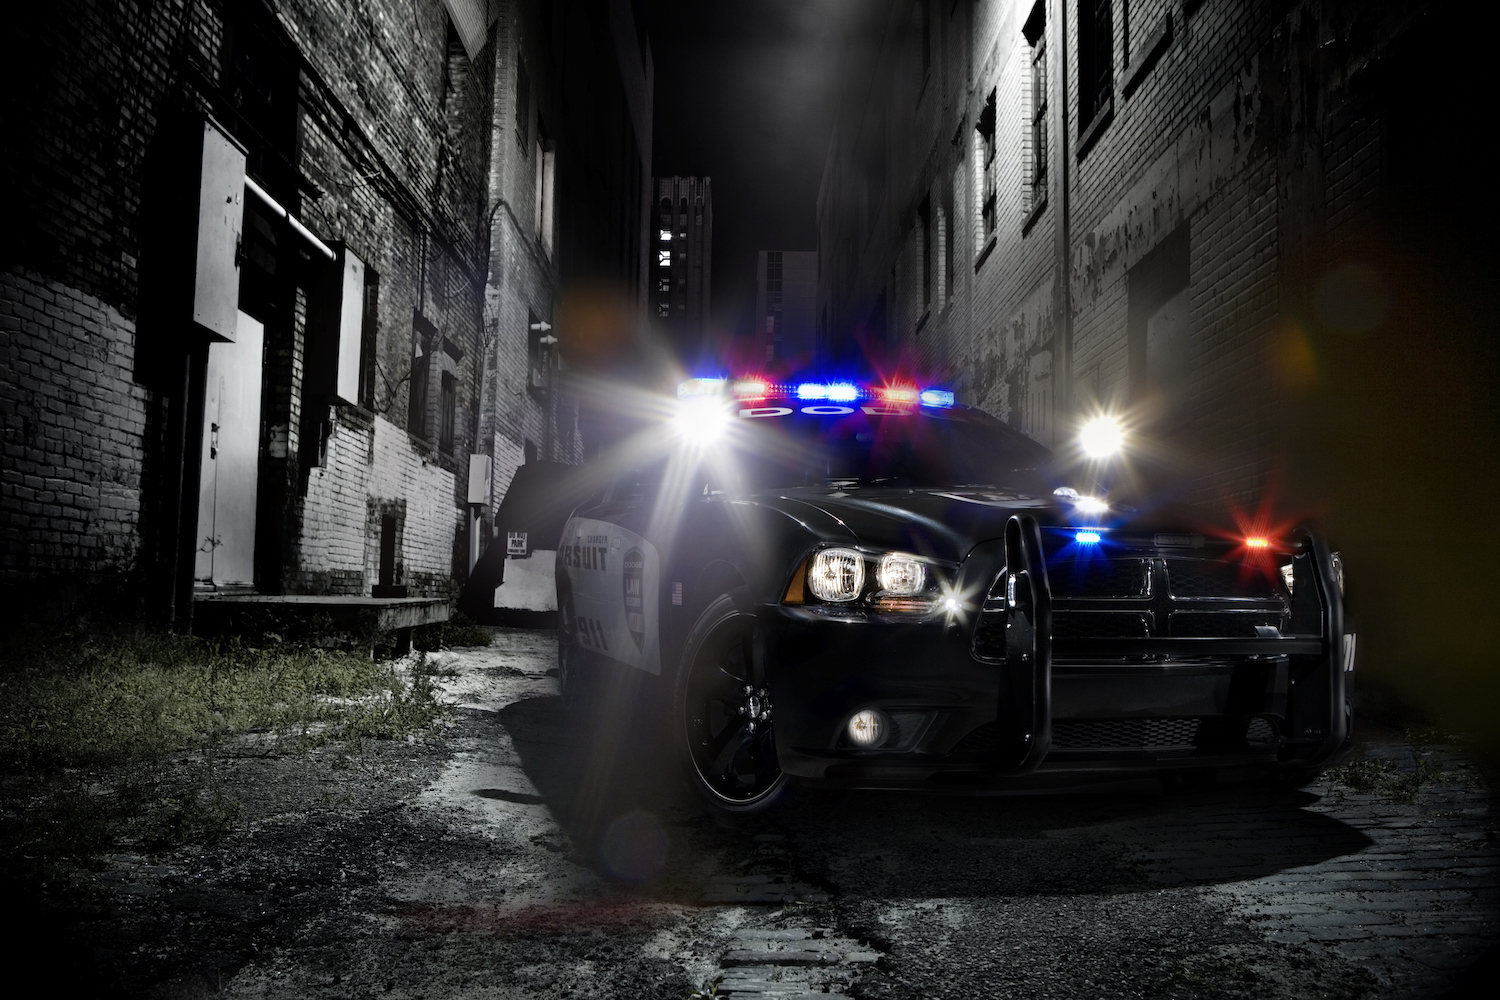 This is a Dodge Charger pursuit police vehicle parked in an alleyway with its lights flashing